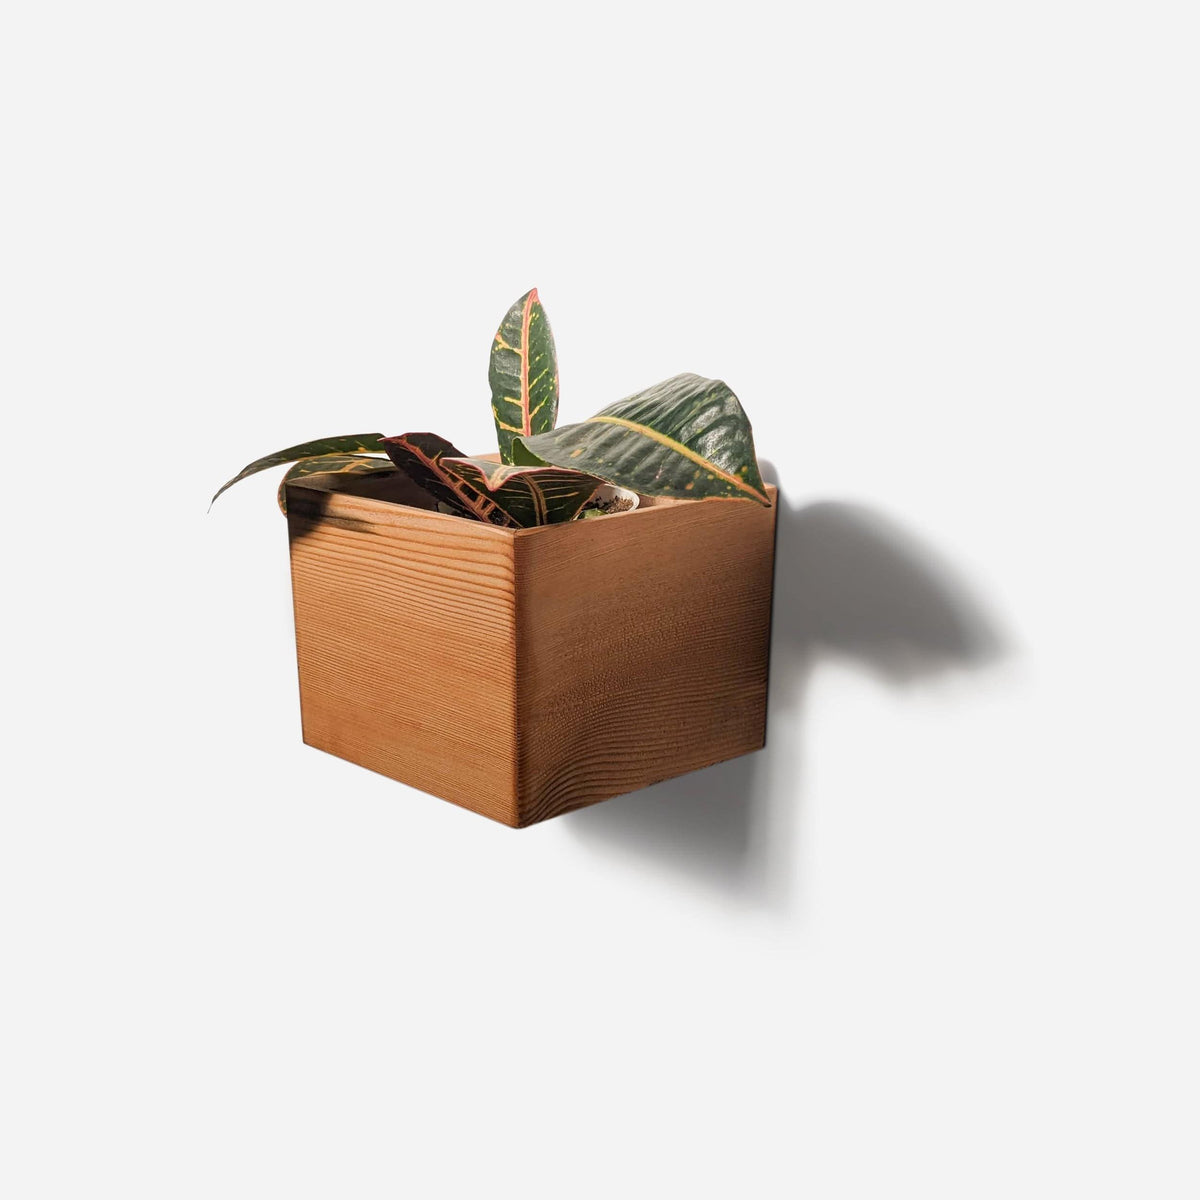 Formr Bling (4&quot; pot) / Natural / One Diamond Self-Watering, Wall-Mounted Planter by Formr